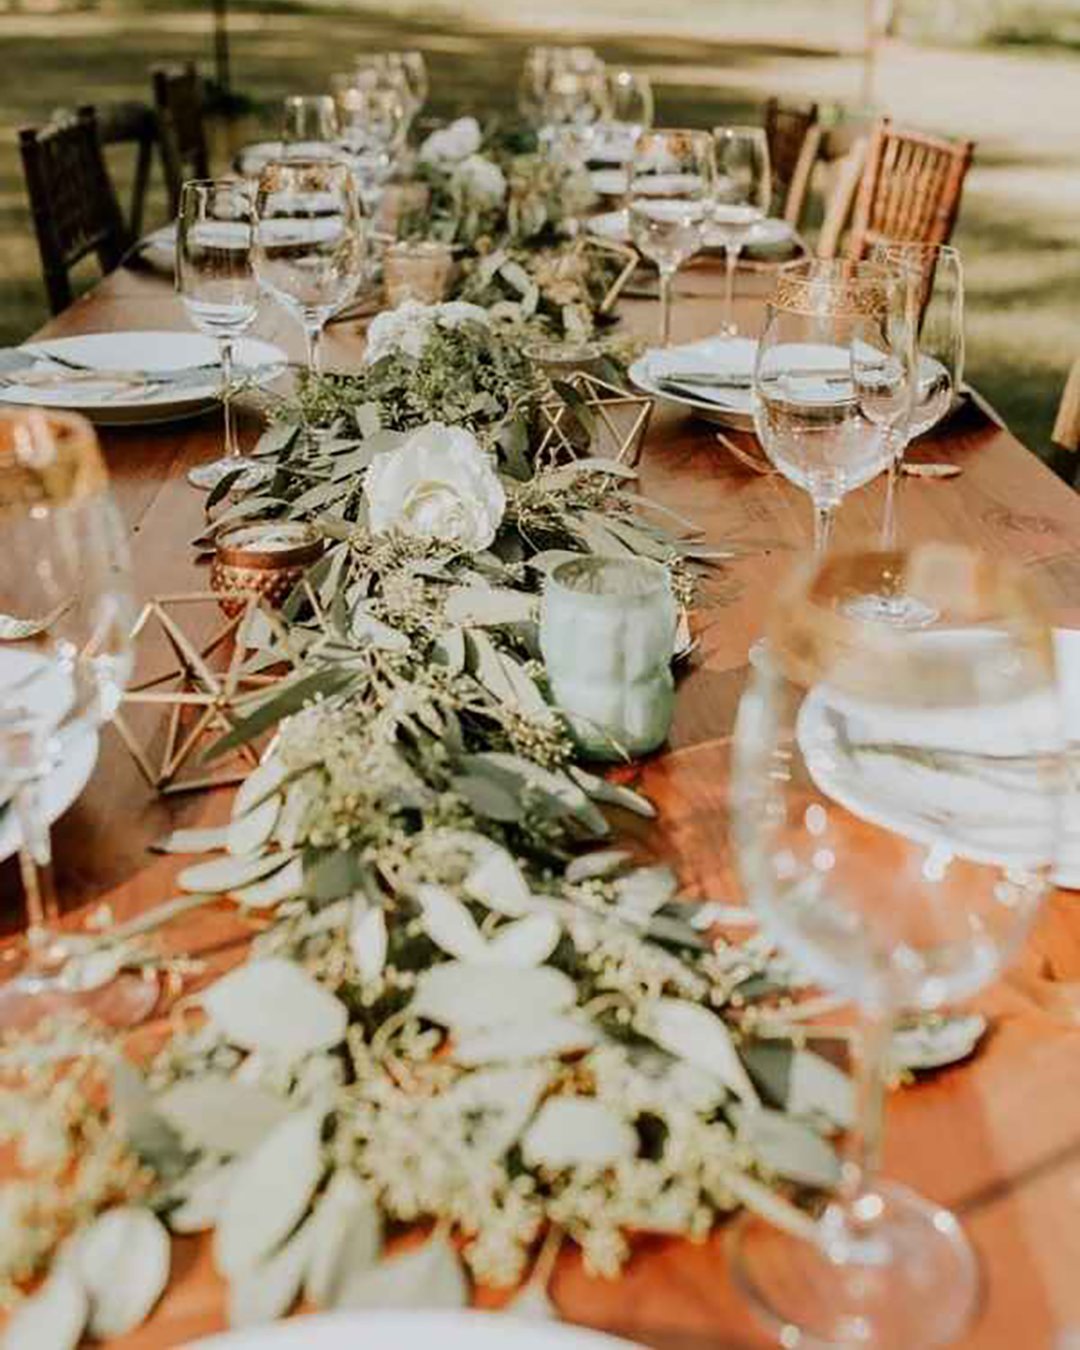 rustic wedding decor greenery and white roses table runner with geometry decor bonvicini photography